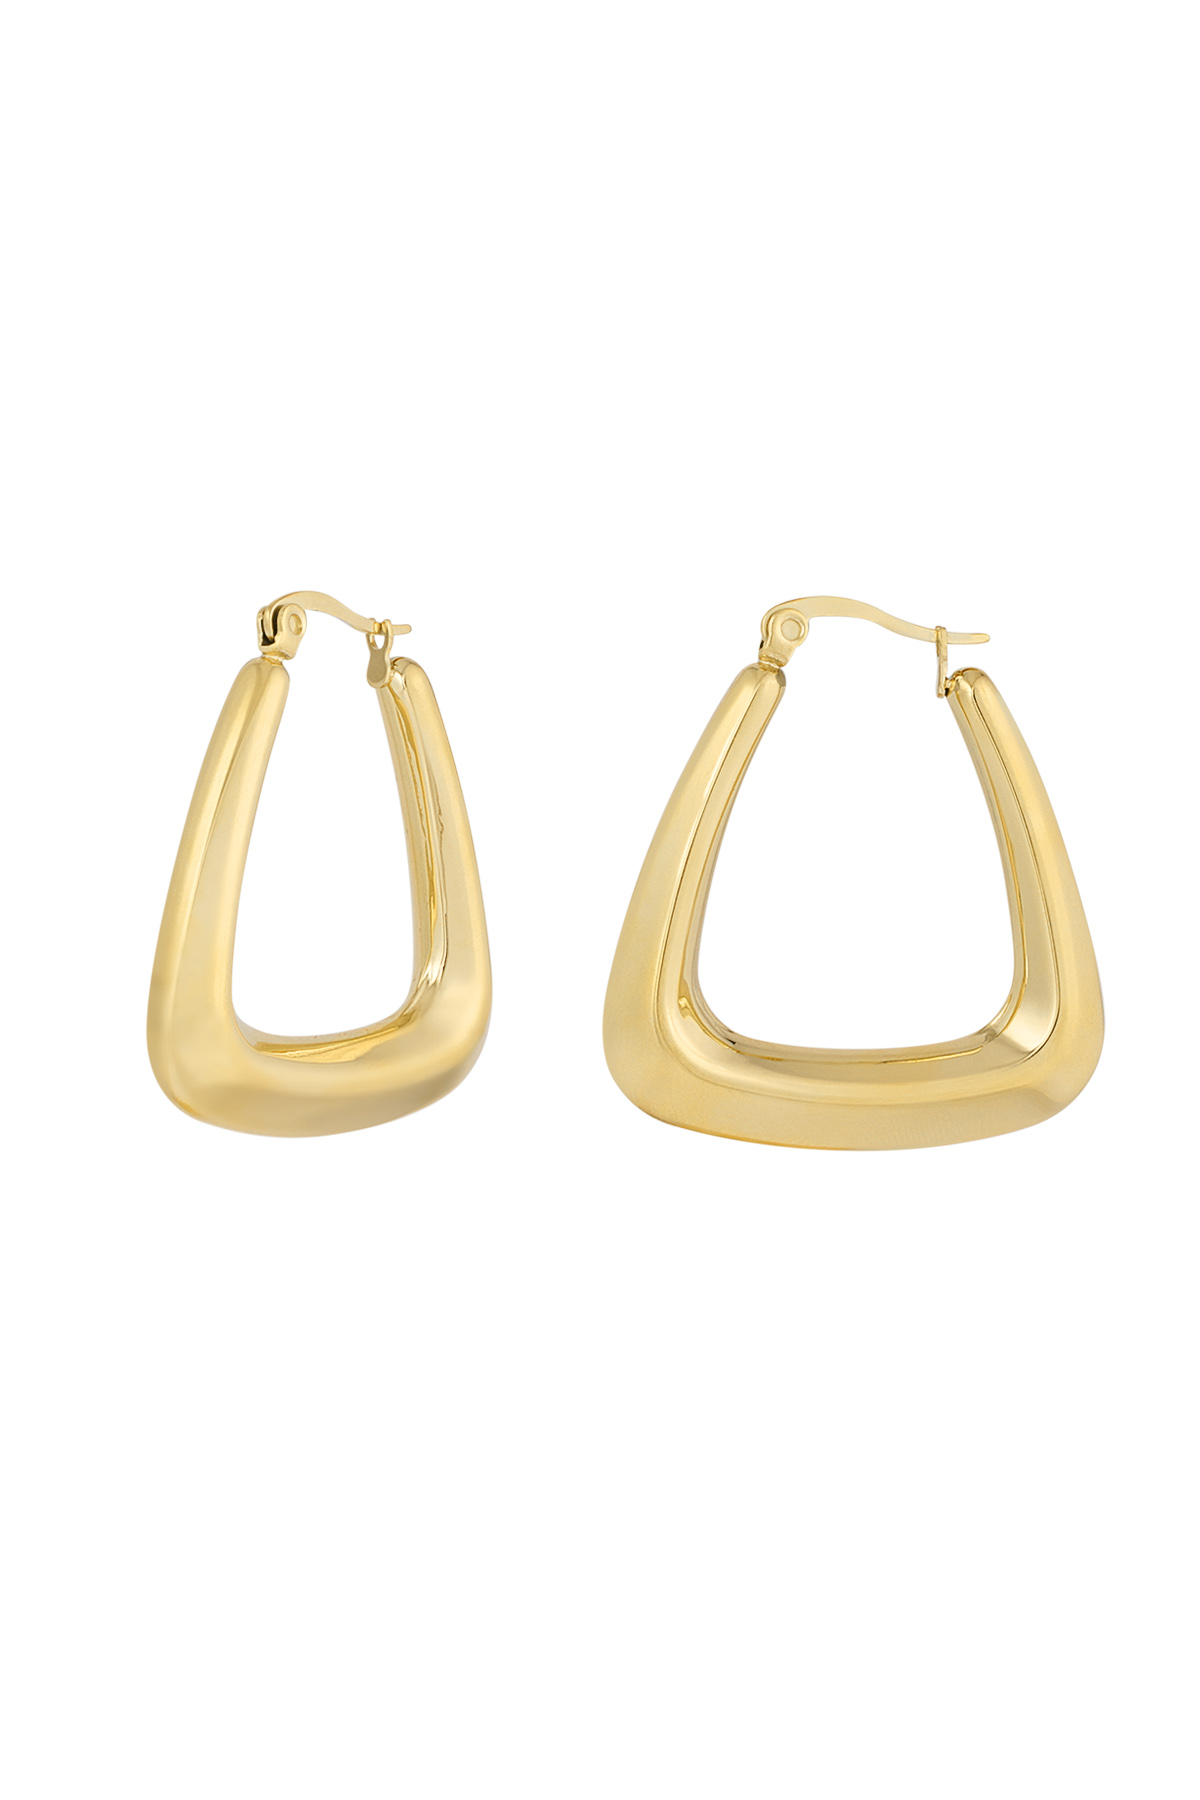 Simple statement earrings - gold h5 